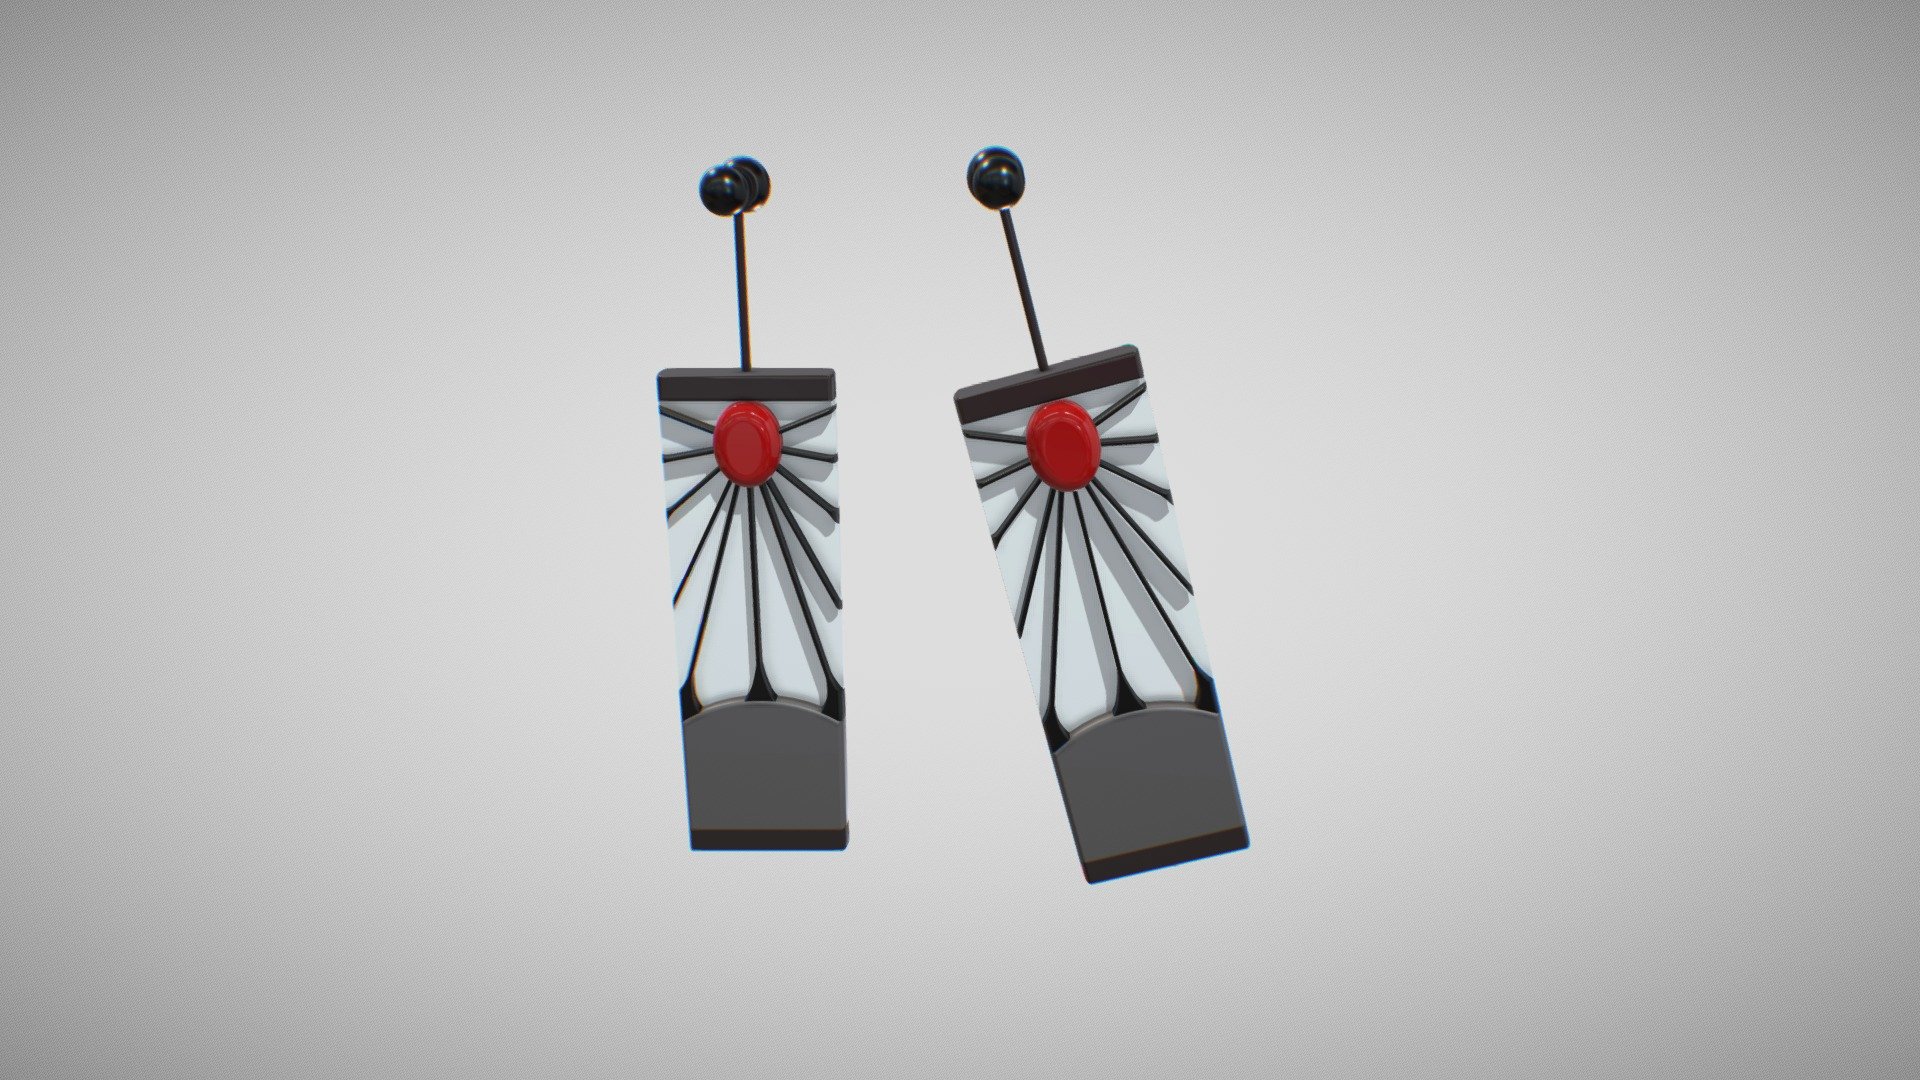 These are the earrings used by Tanjiro Kamado From the anime &ldquo;Demon Slayer